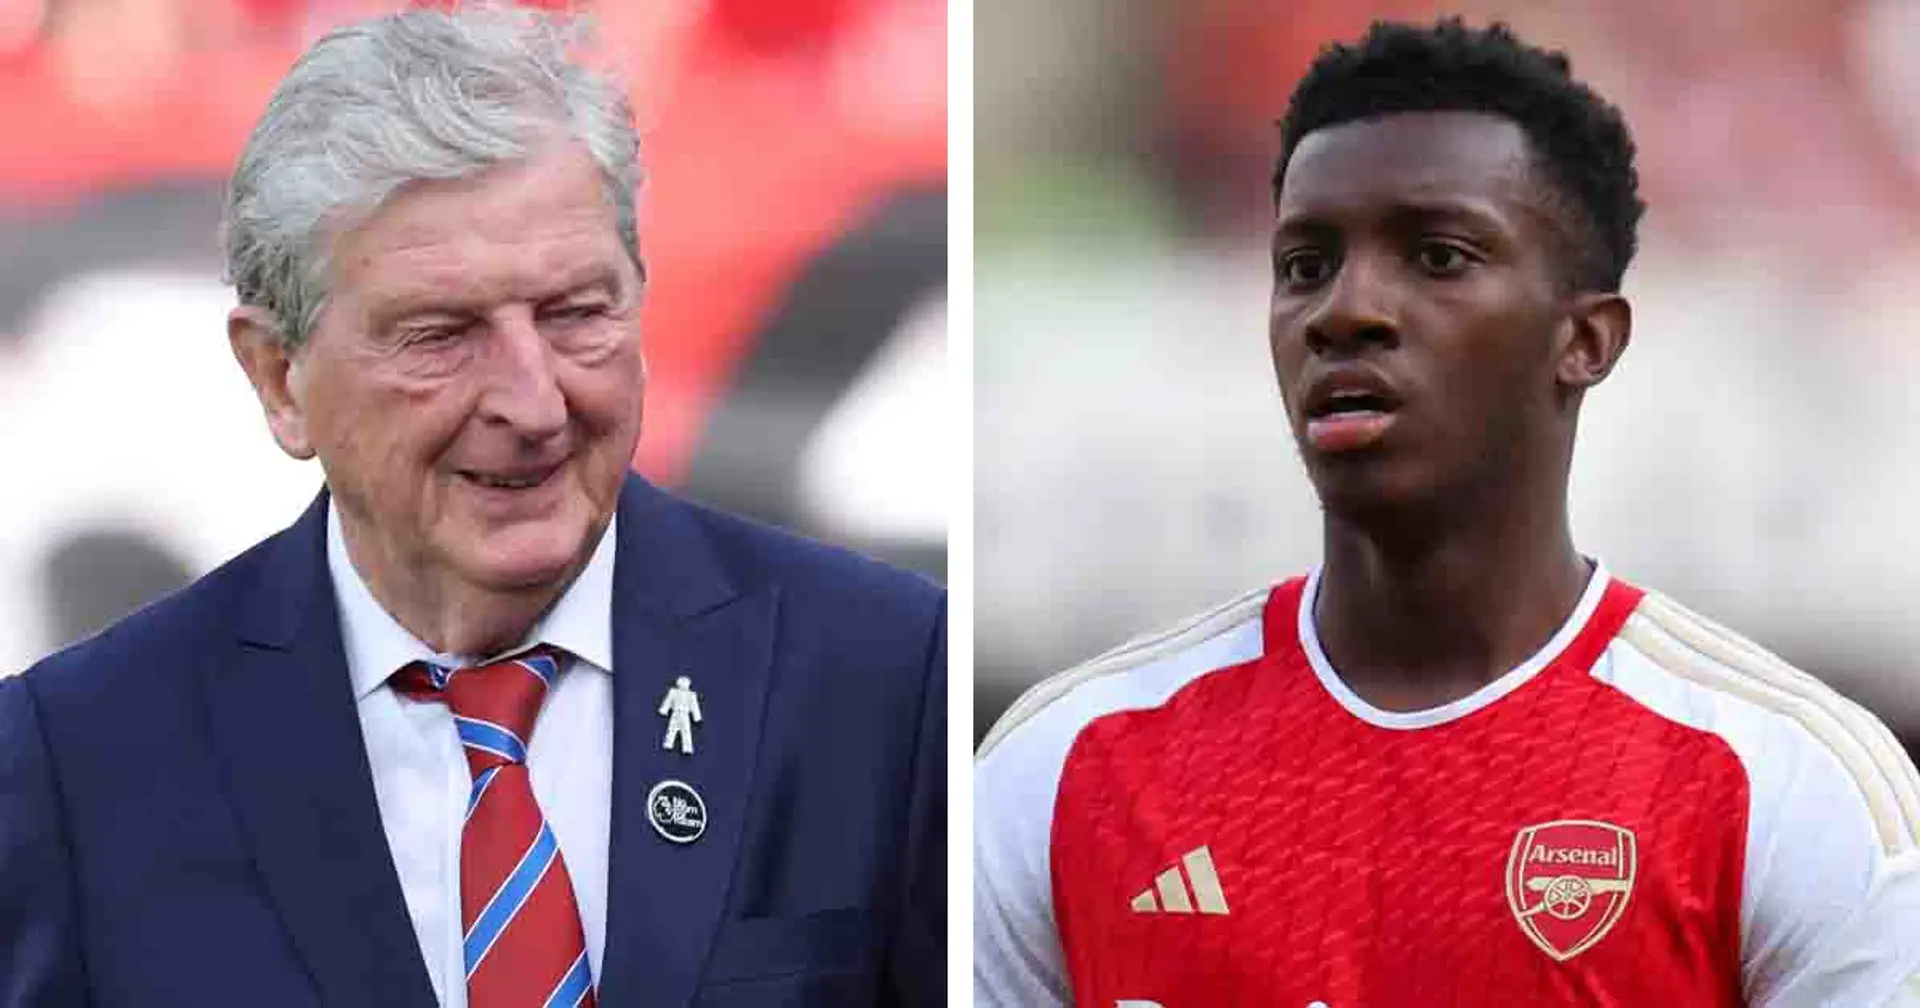 Crystal Palace enquire about Eddie Nketiah signing, Arsenal's response revealed (reliability: 4 stars)